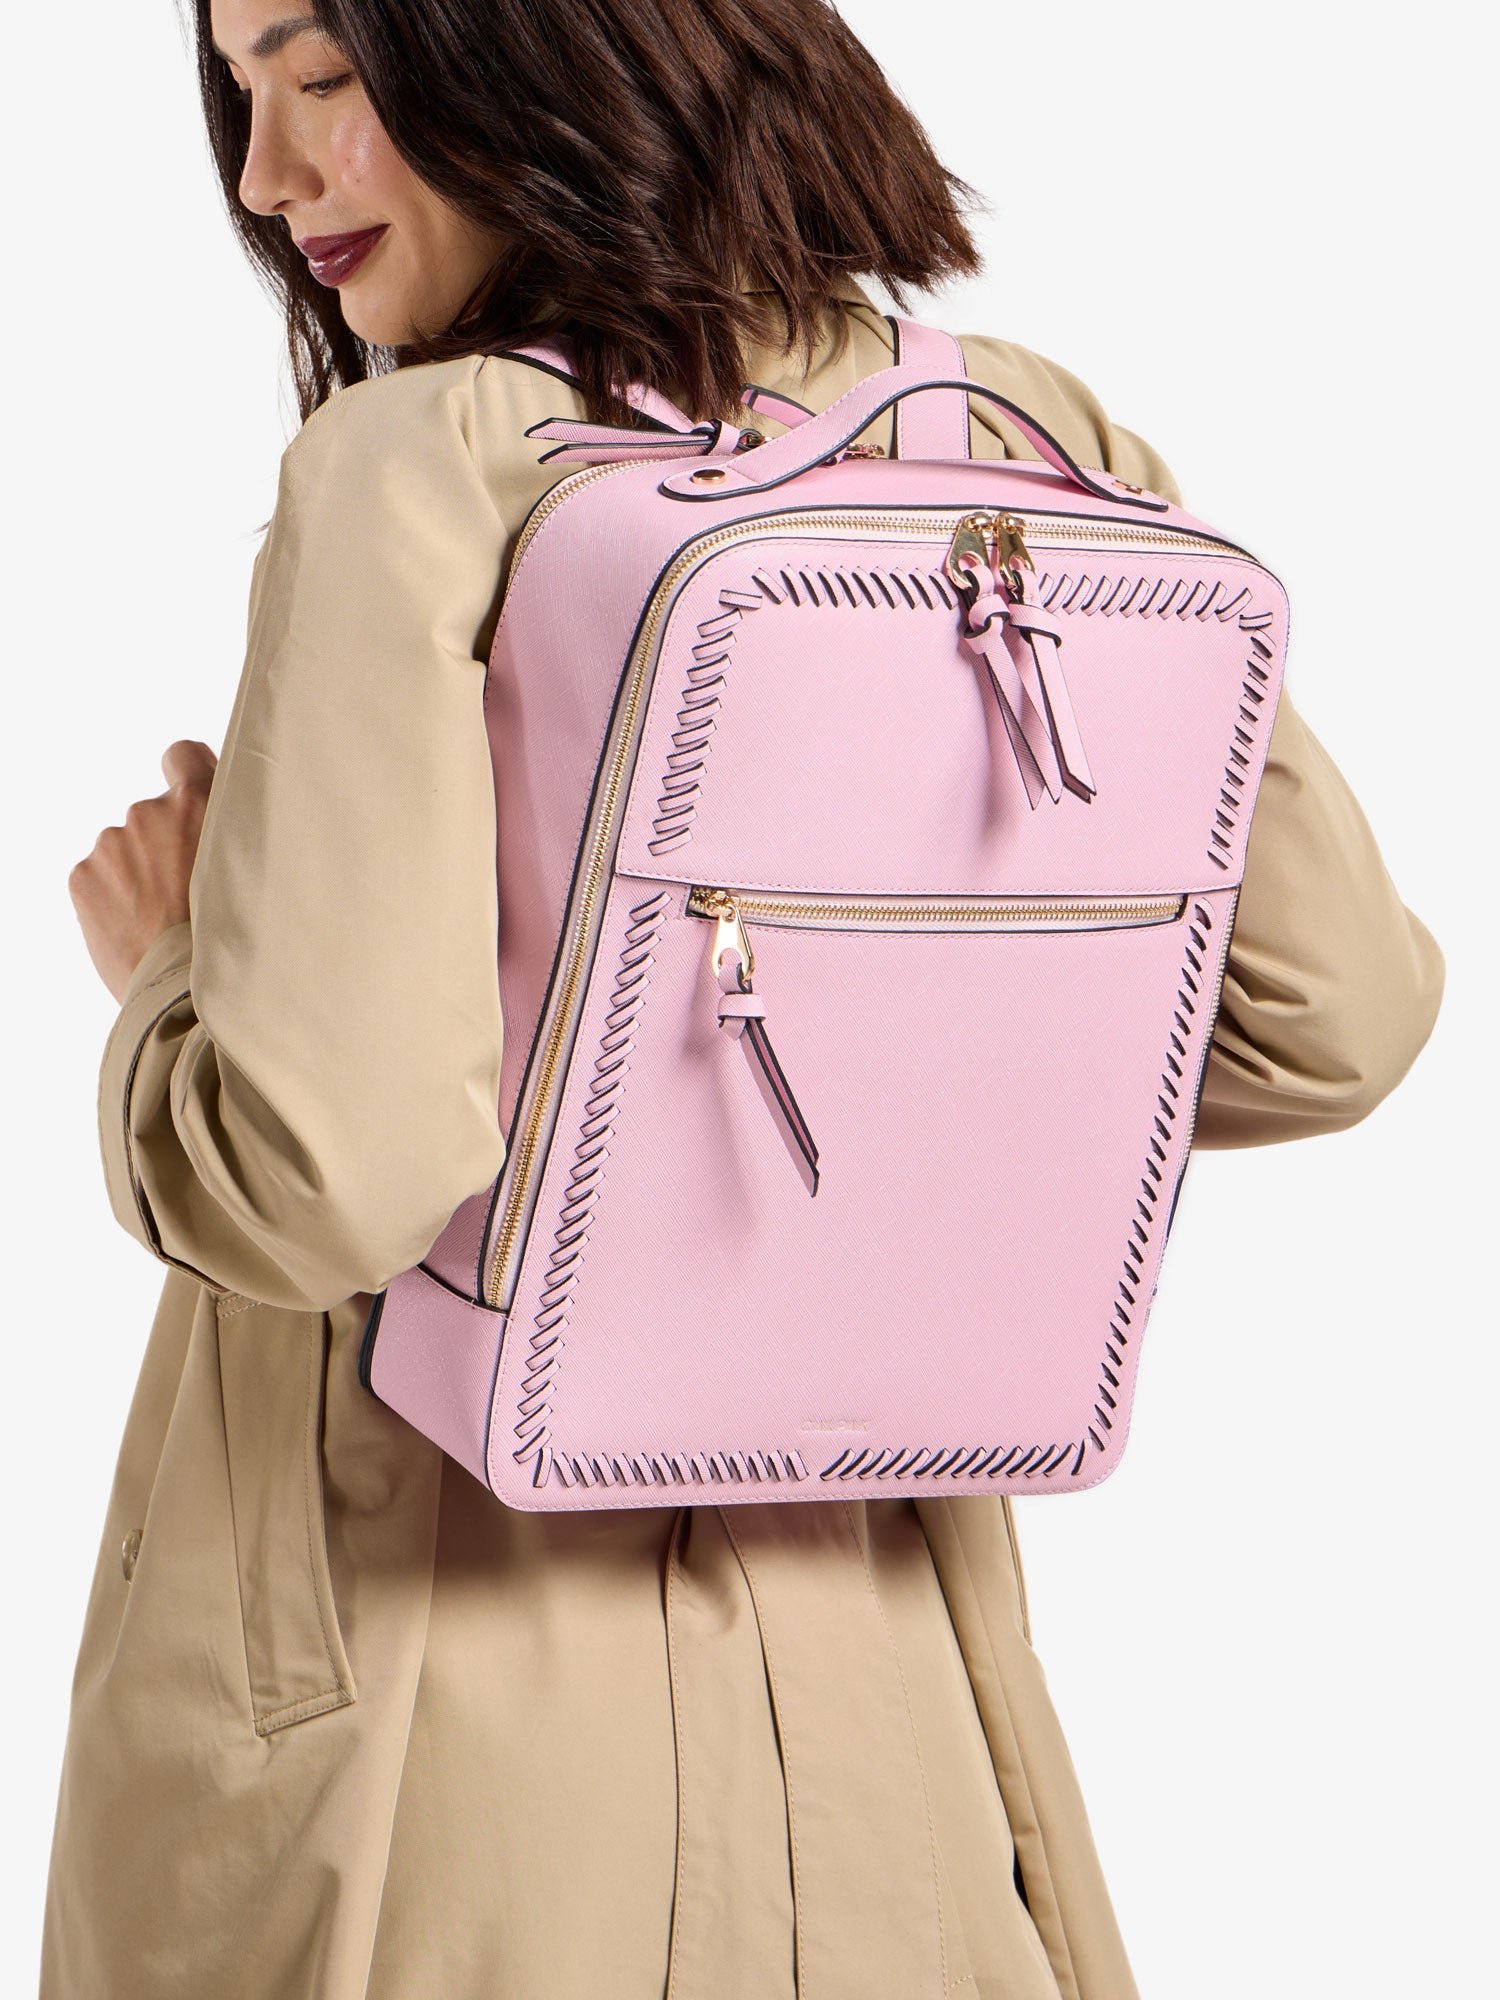 Model wearing faux leather CALPAK 15 inch Laptop Backpack in pink strawberry